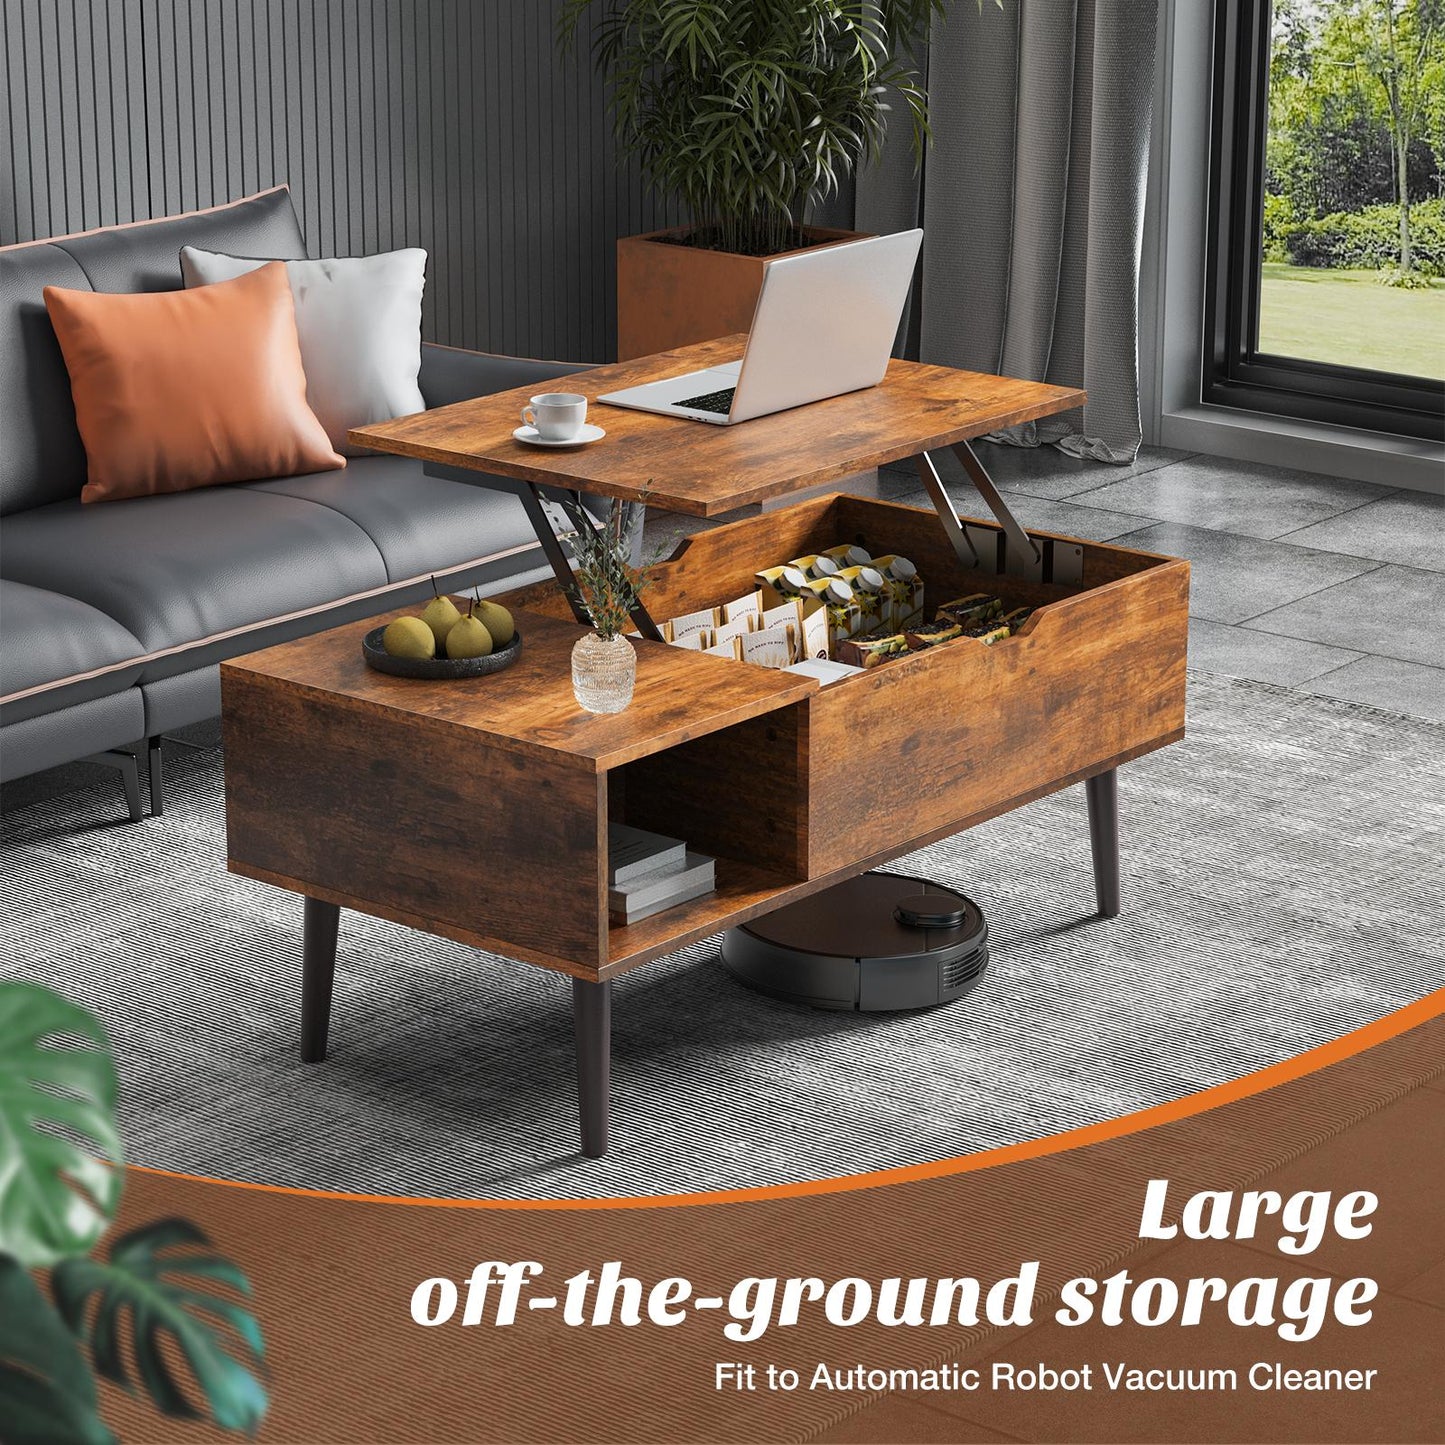 Lift Top Coffee Table ，Wooden Furniture with Hidden Compartment and Adjustable Storage